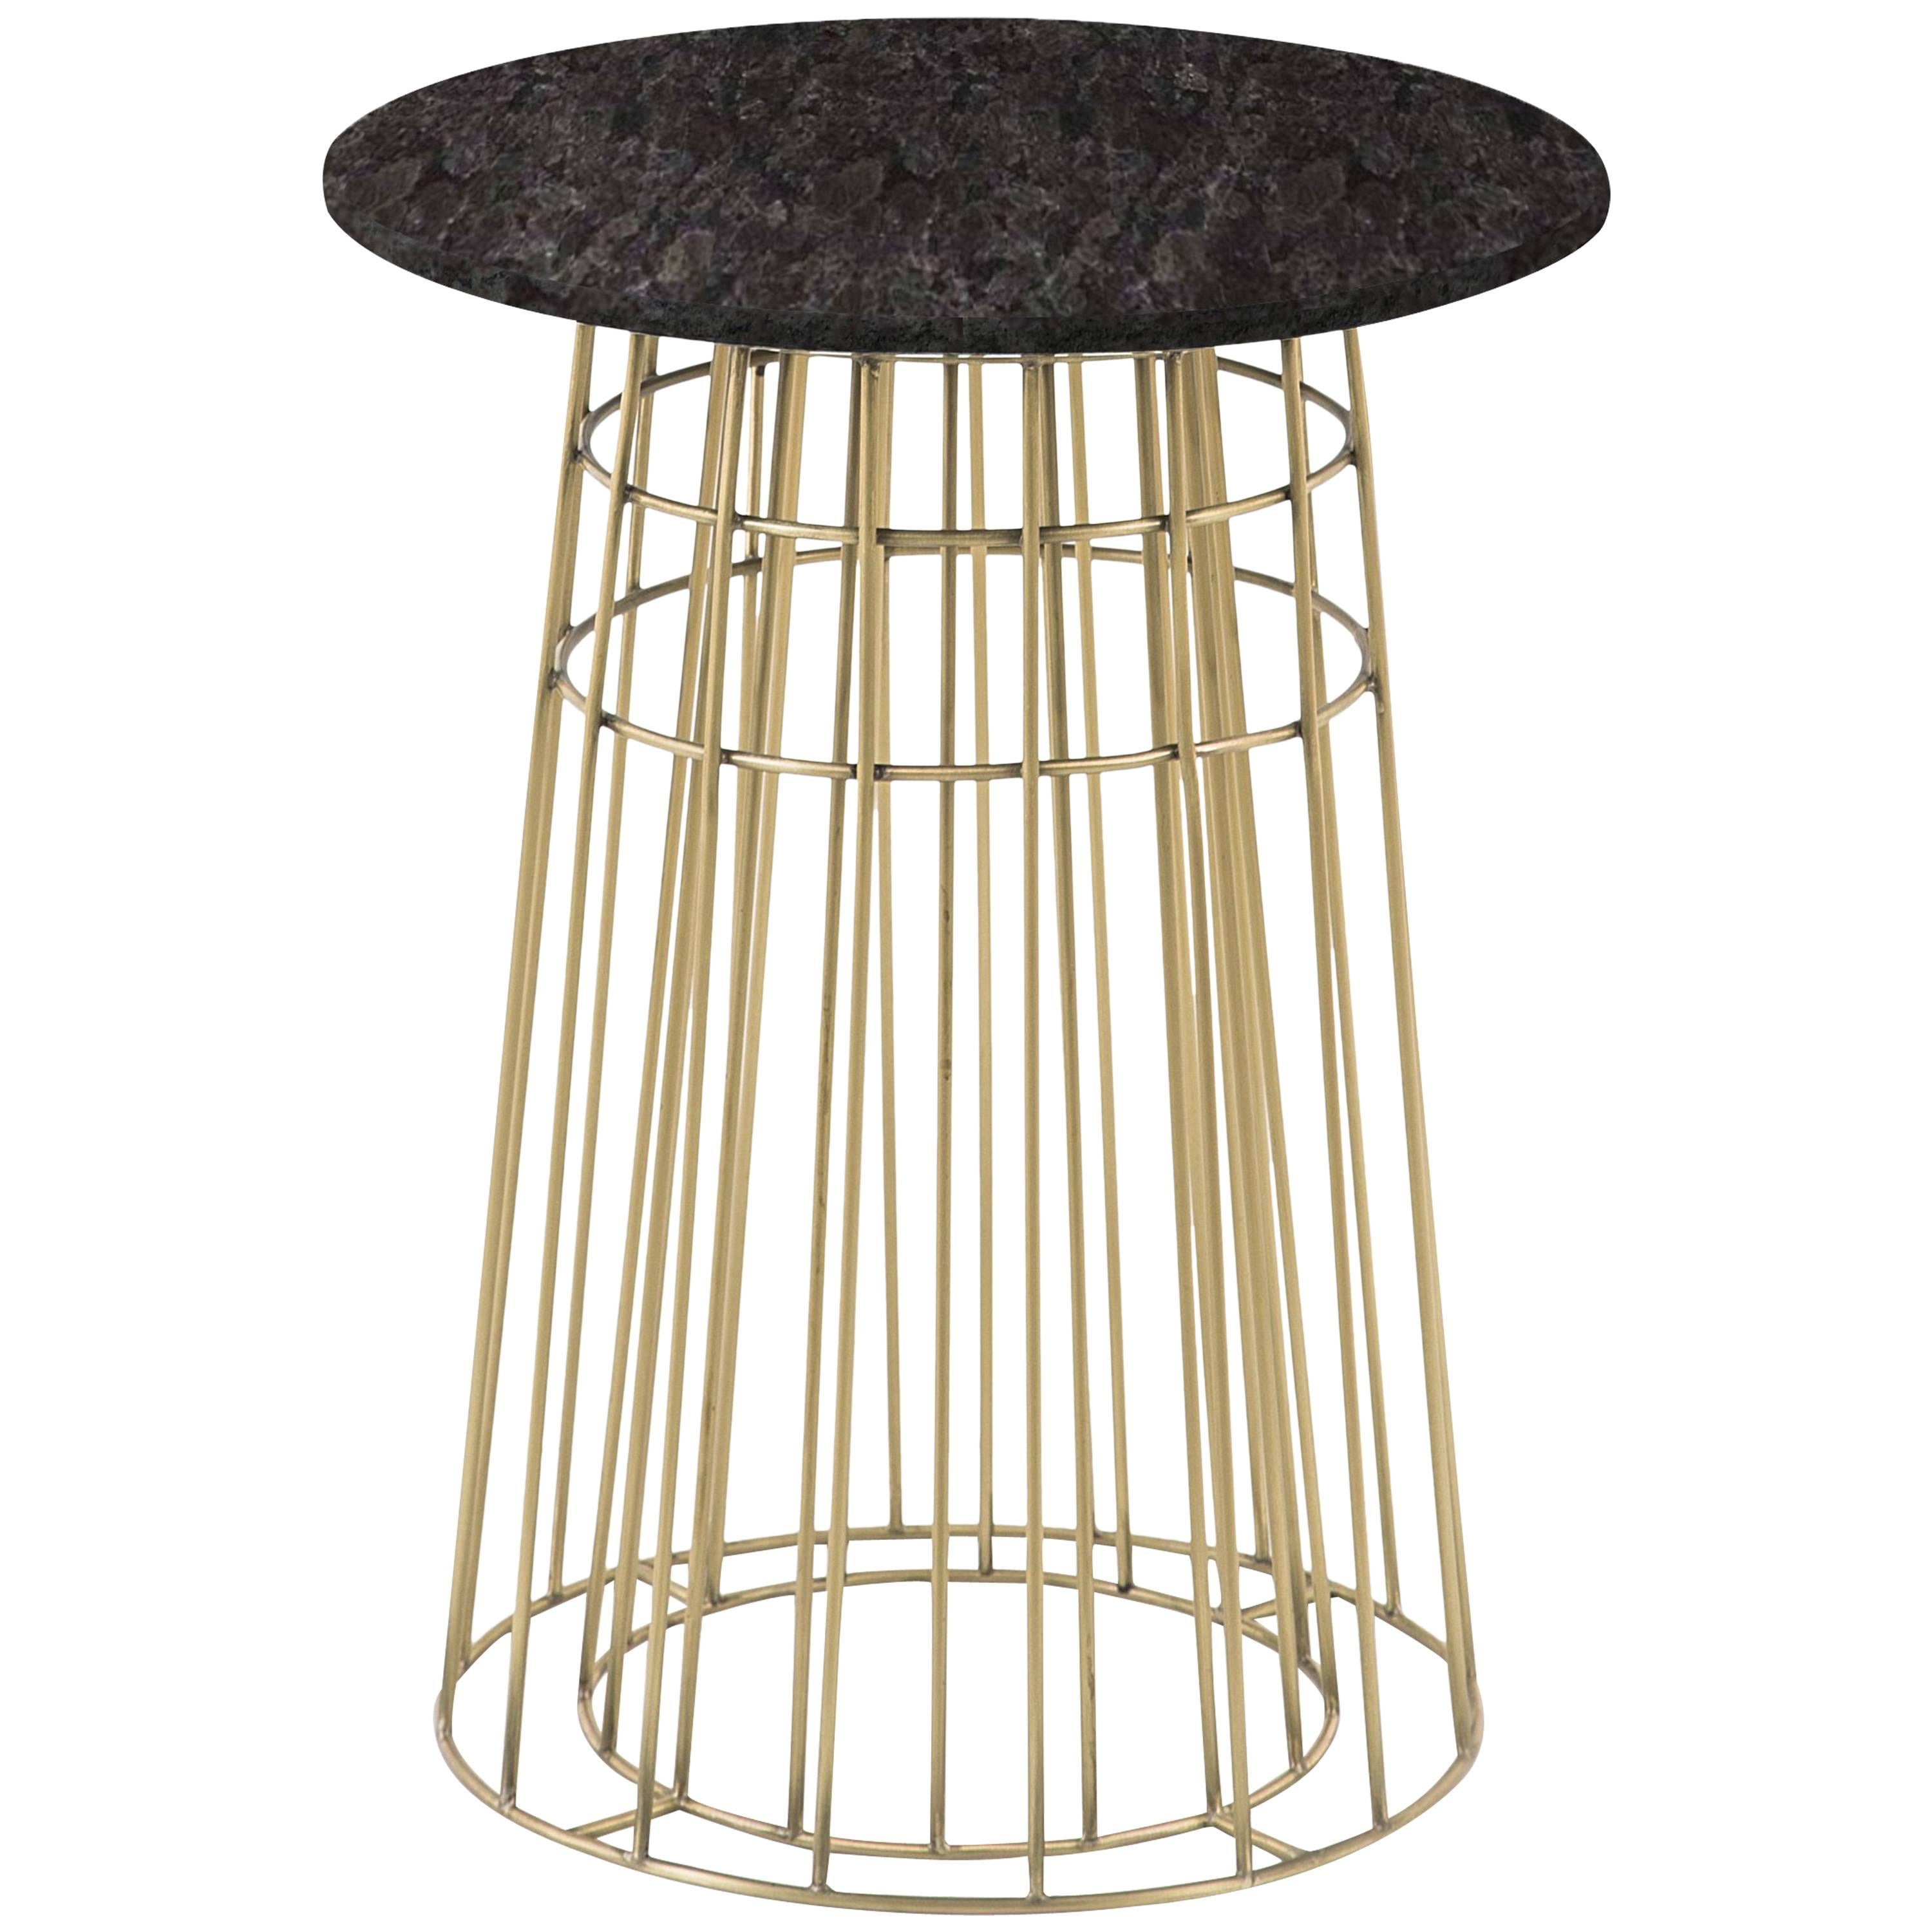 Contemporary Side Table or Tray Table in Brass and Cafe Baia Granite